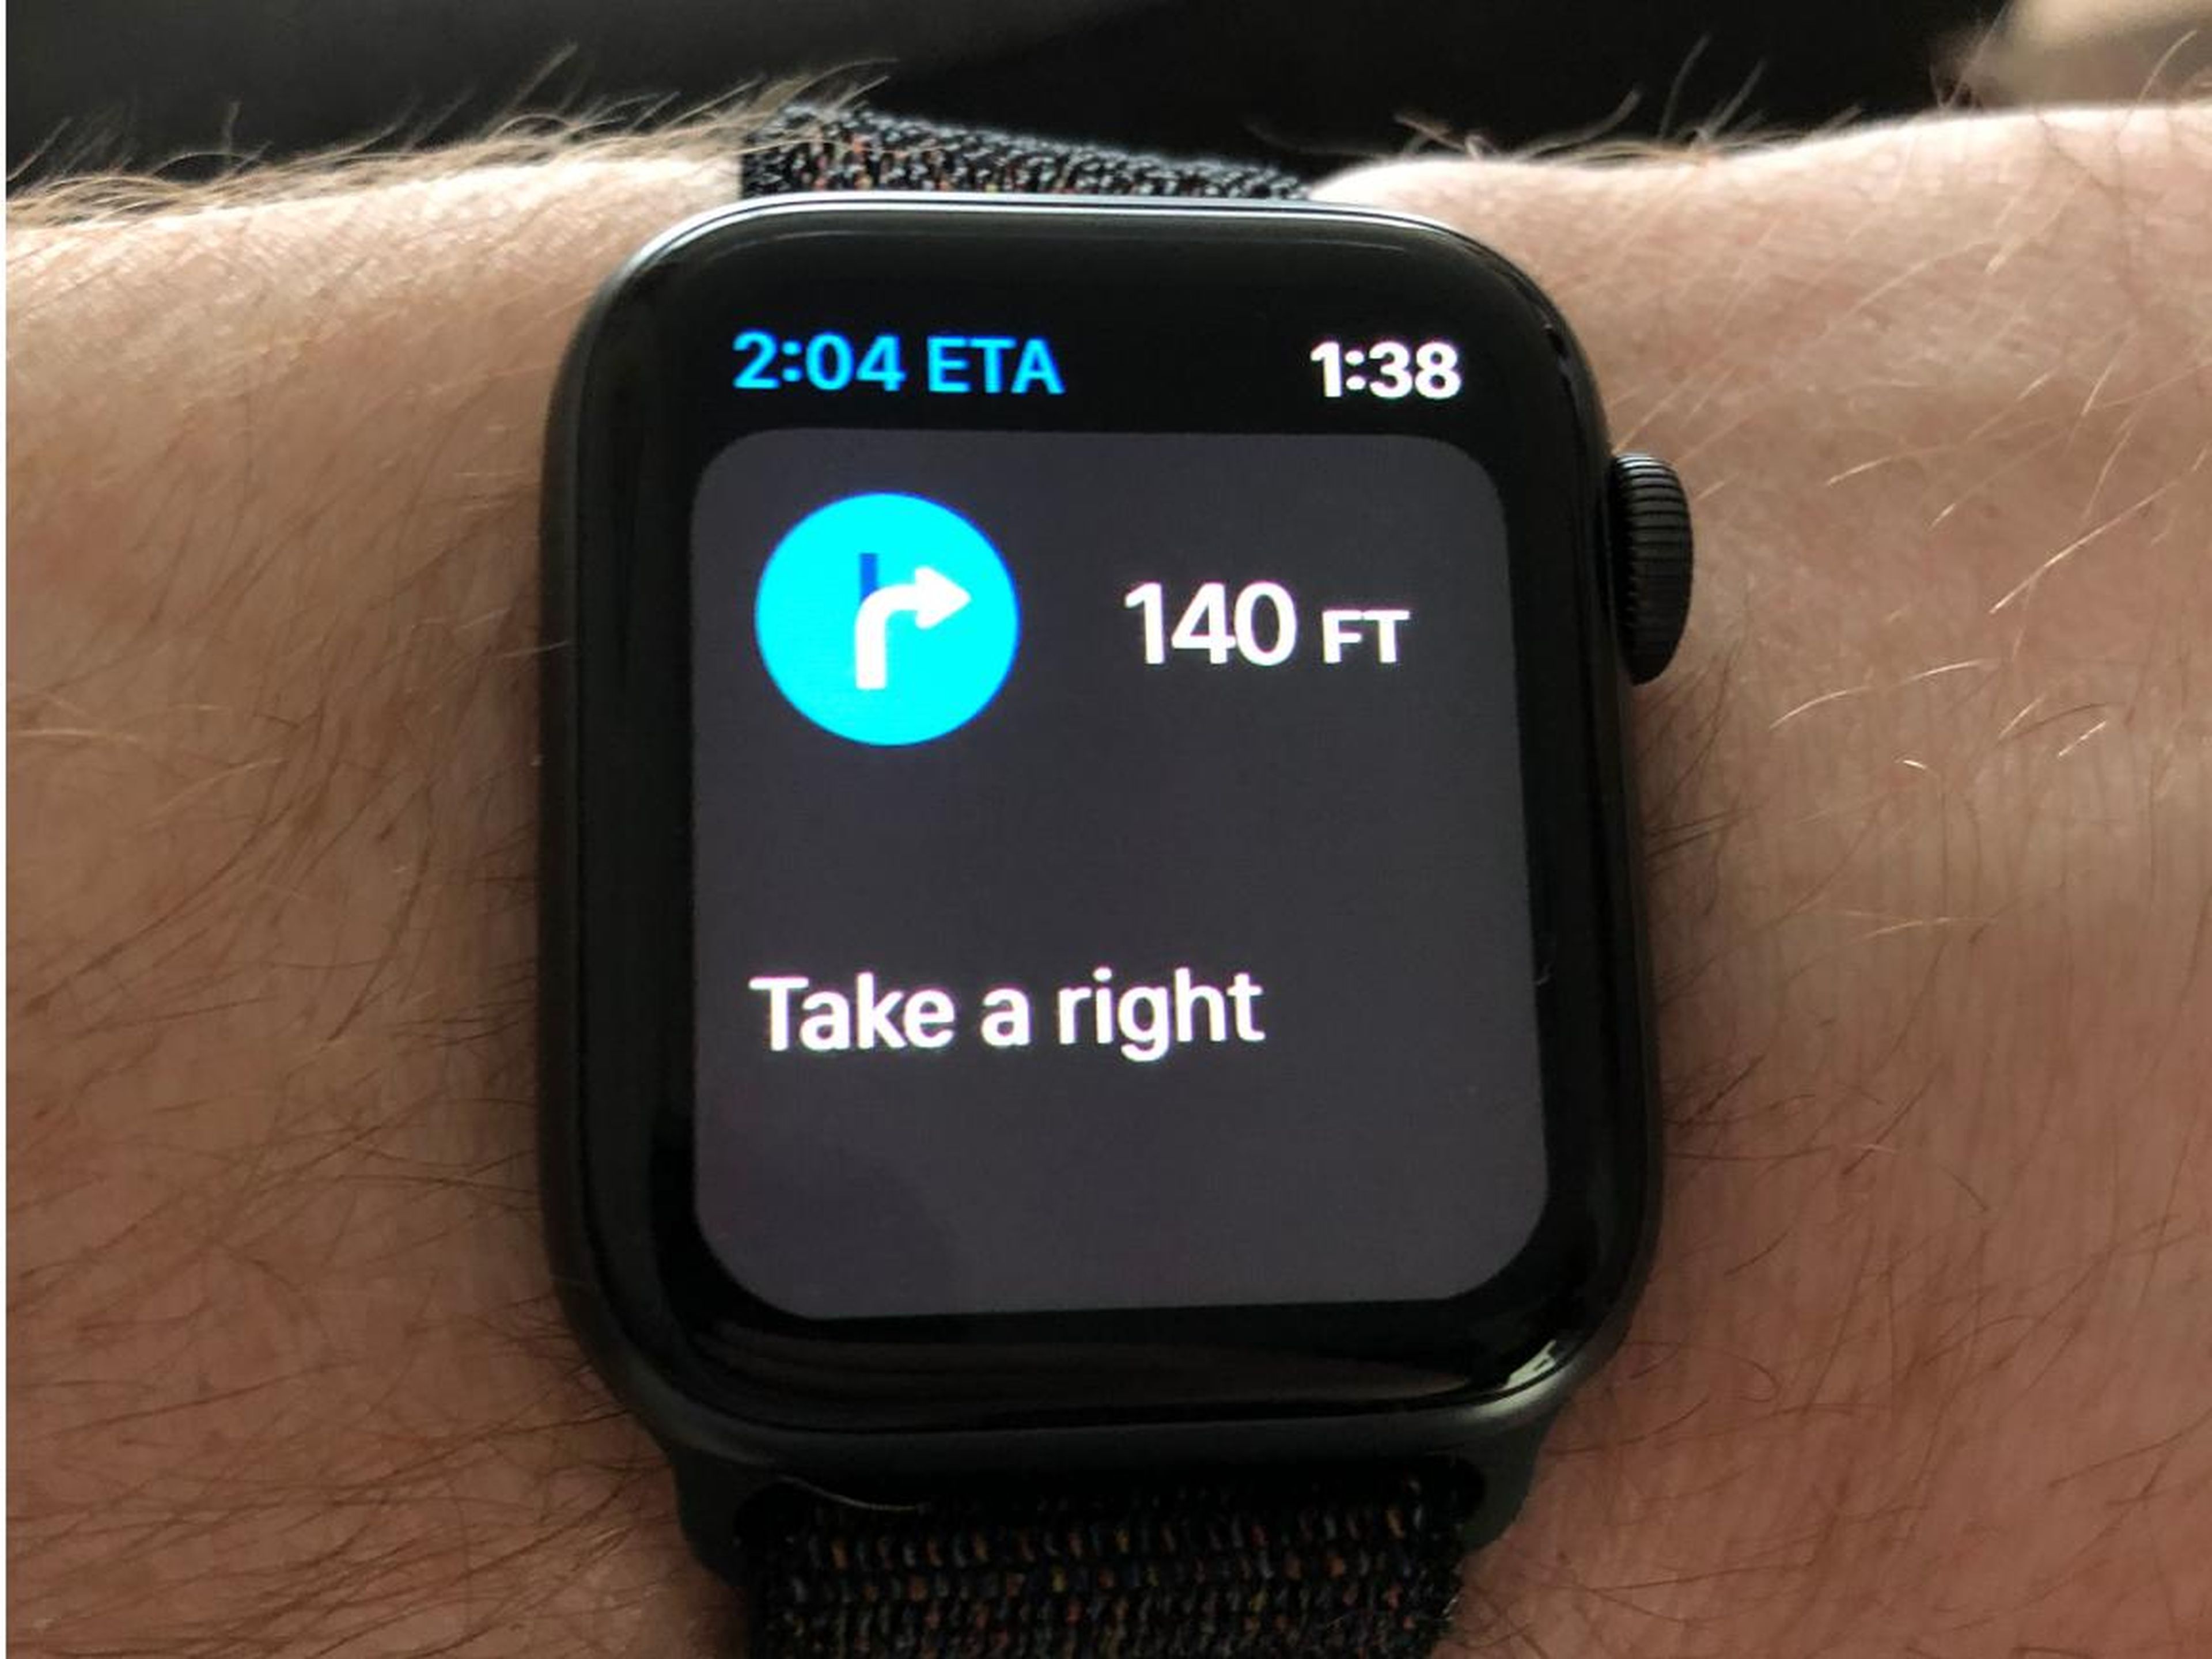 18. The Apple Watch can be your navigator, or co-pilot, if you're driving or going somewhere.